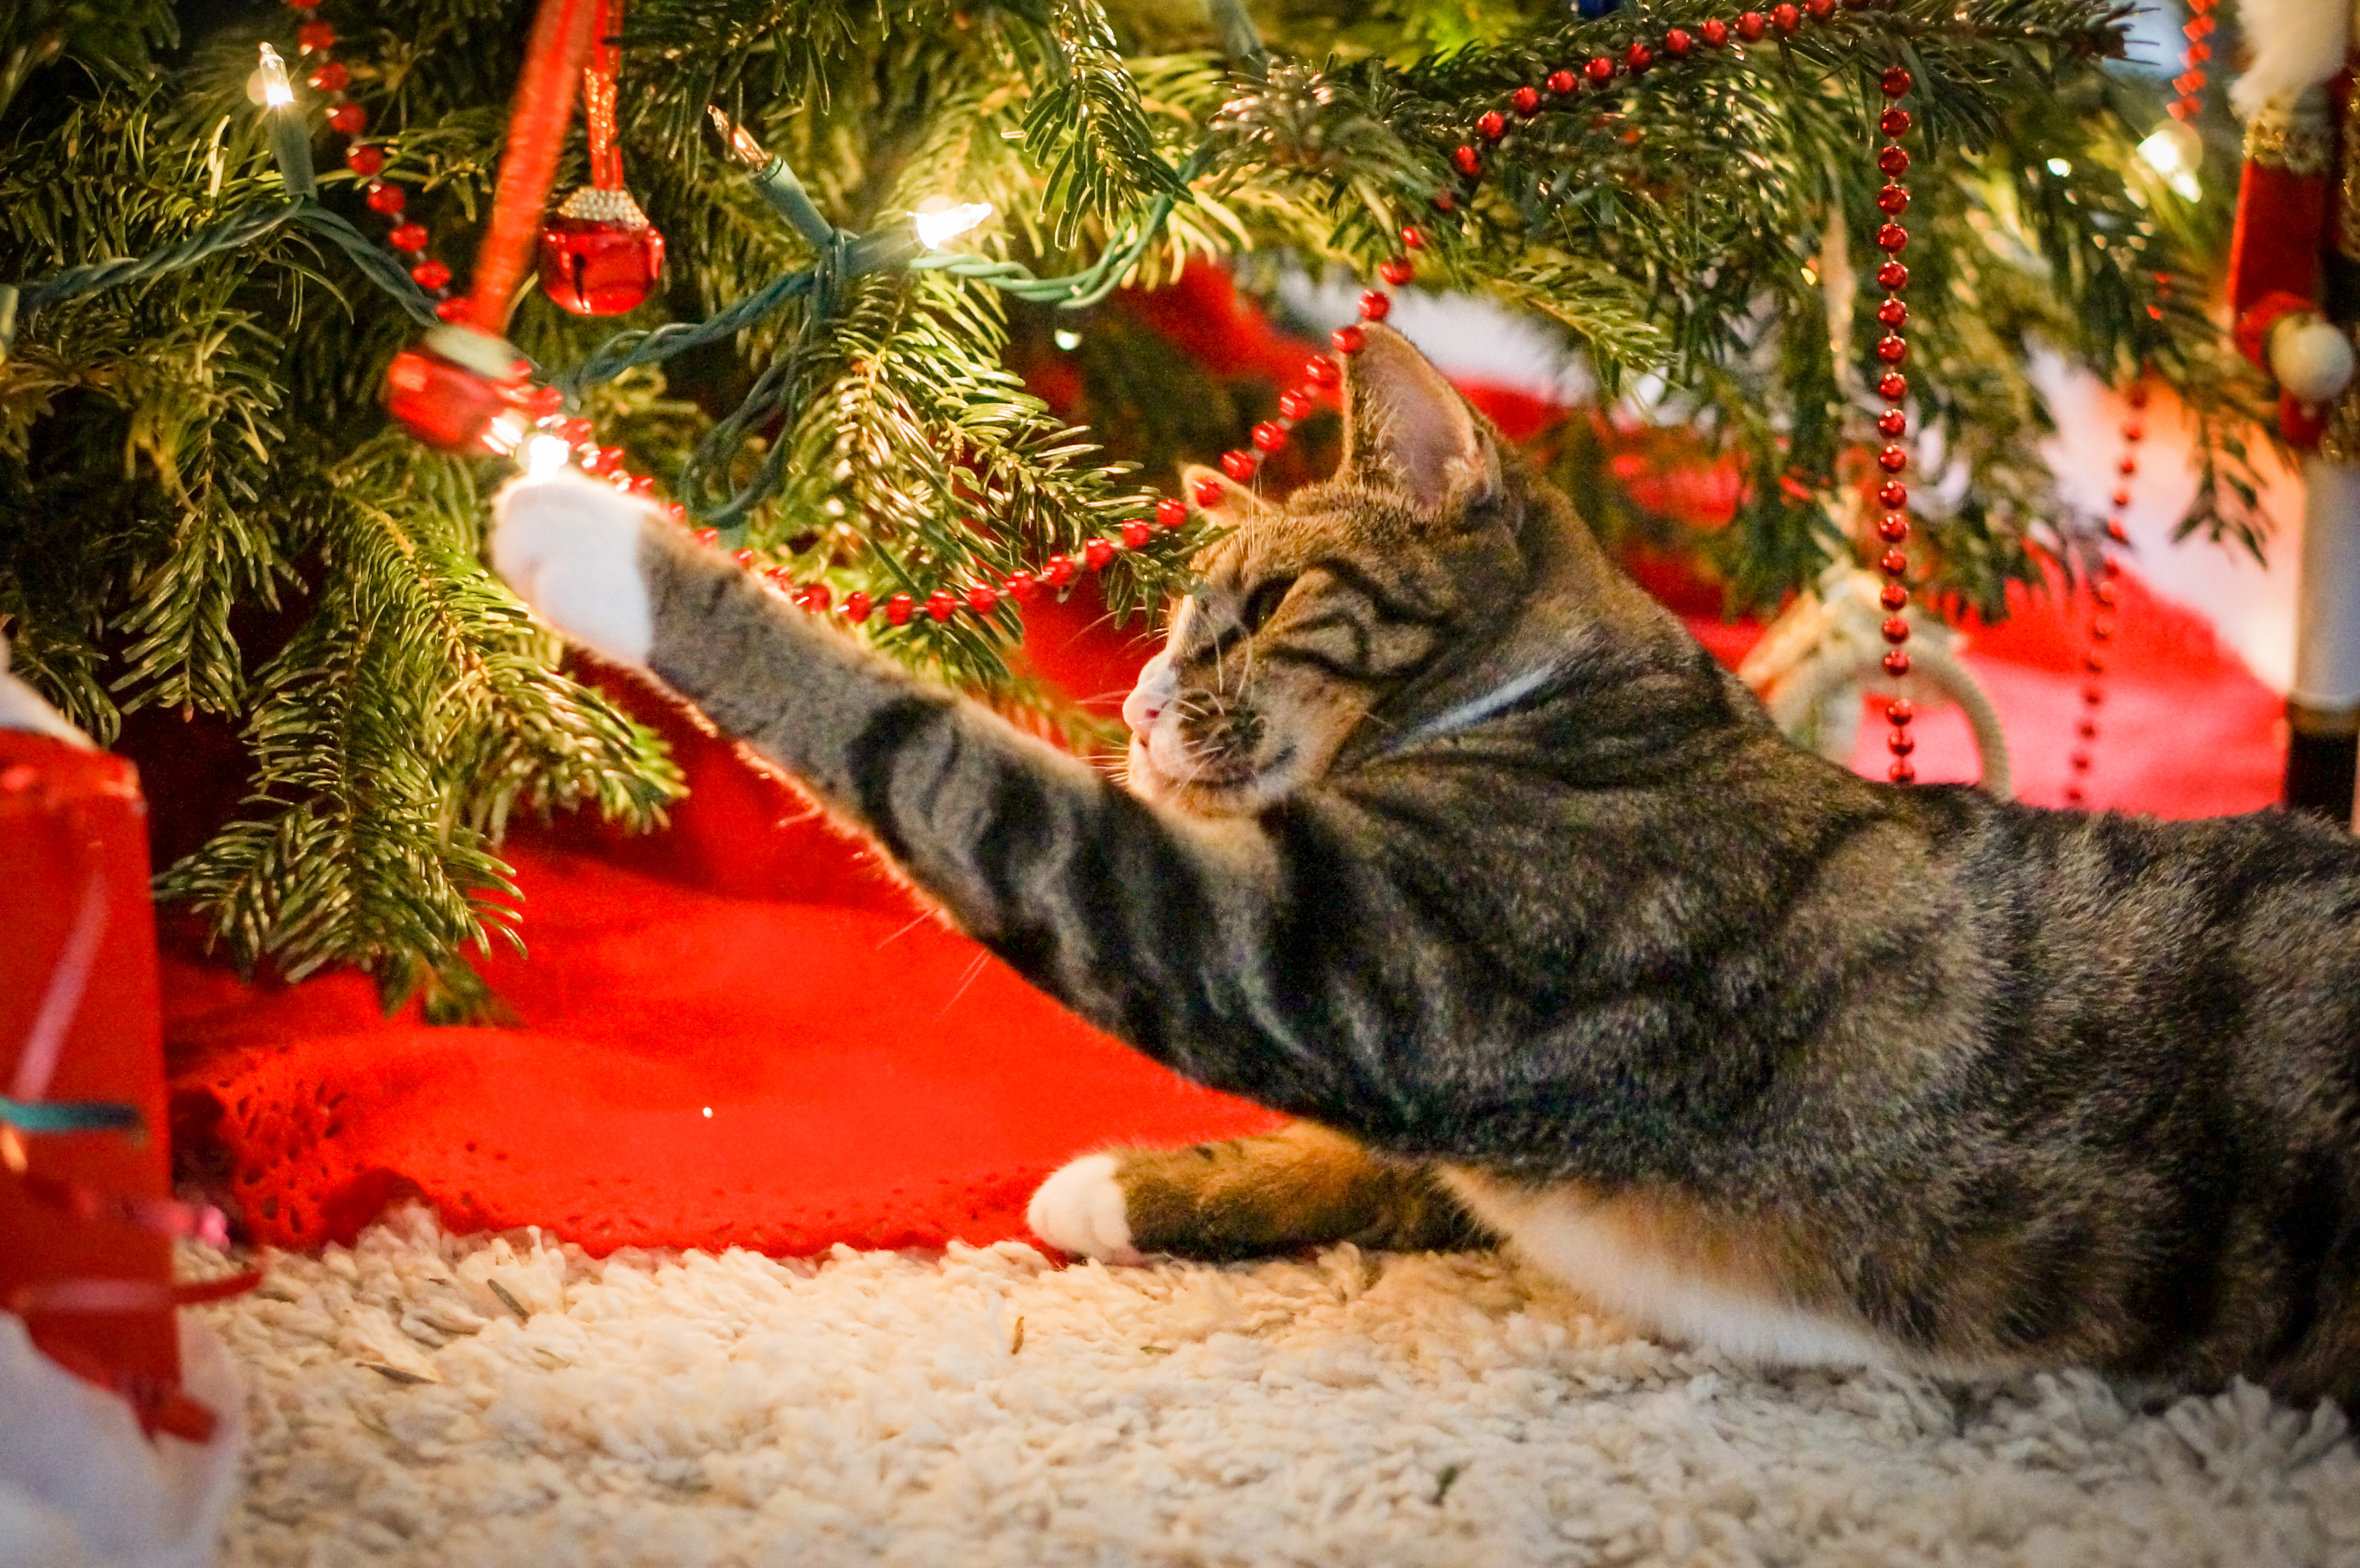 How to cat proof house to prevent cat or kitten from getting stuck in Christmas tree